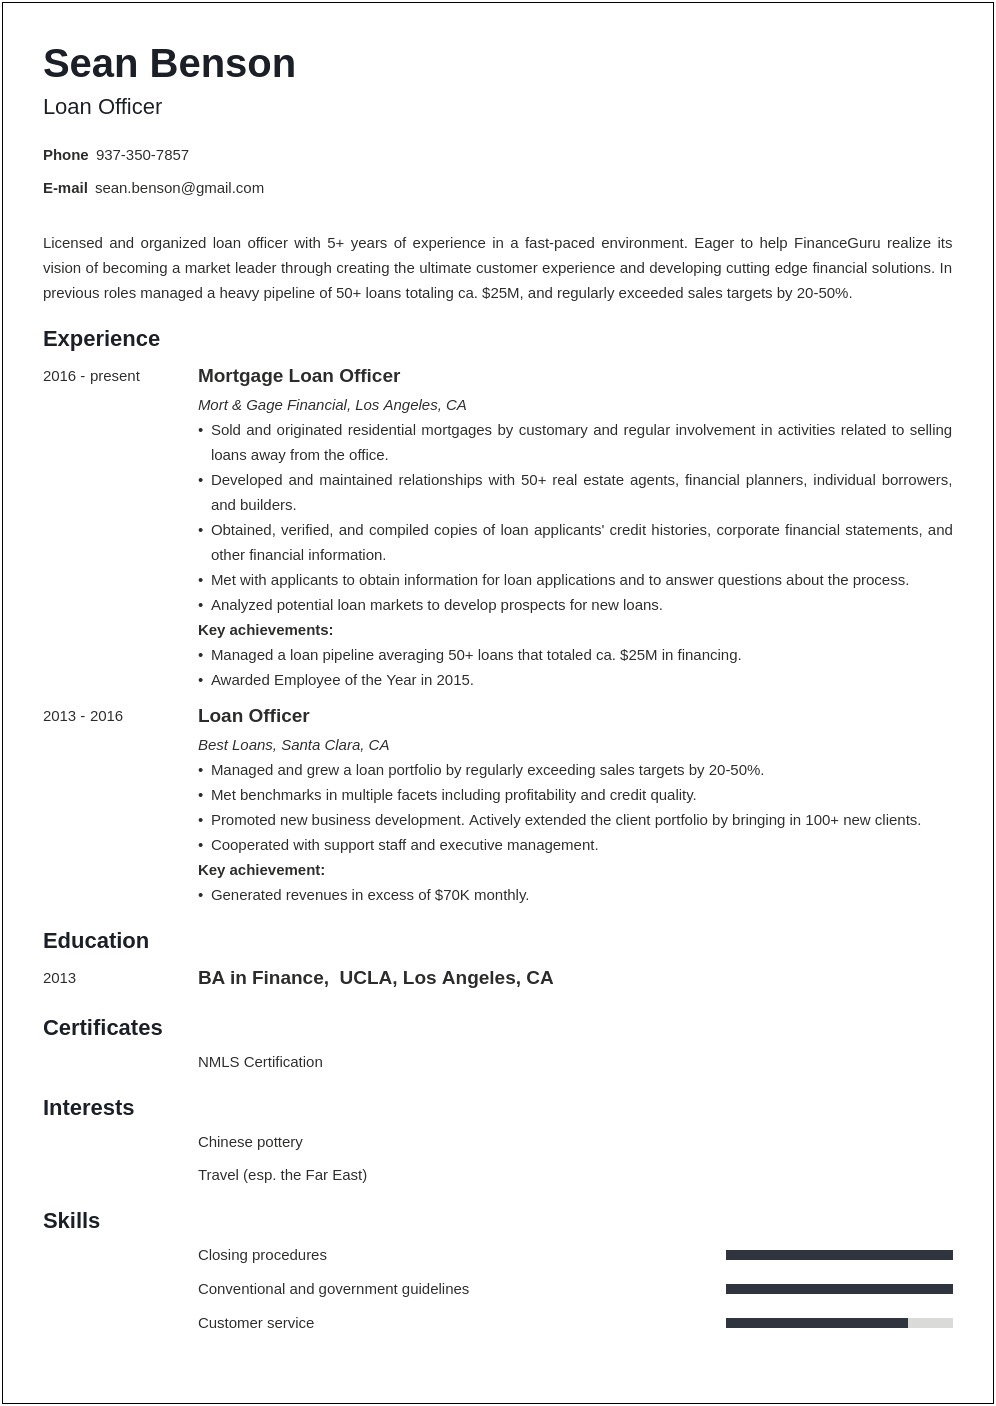 Resume Objective For Mortgage Industry